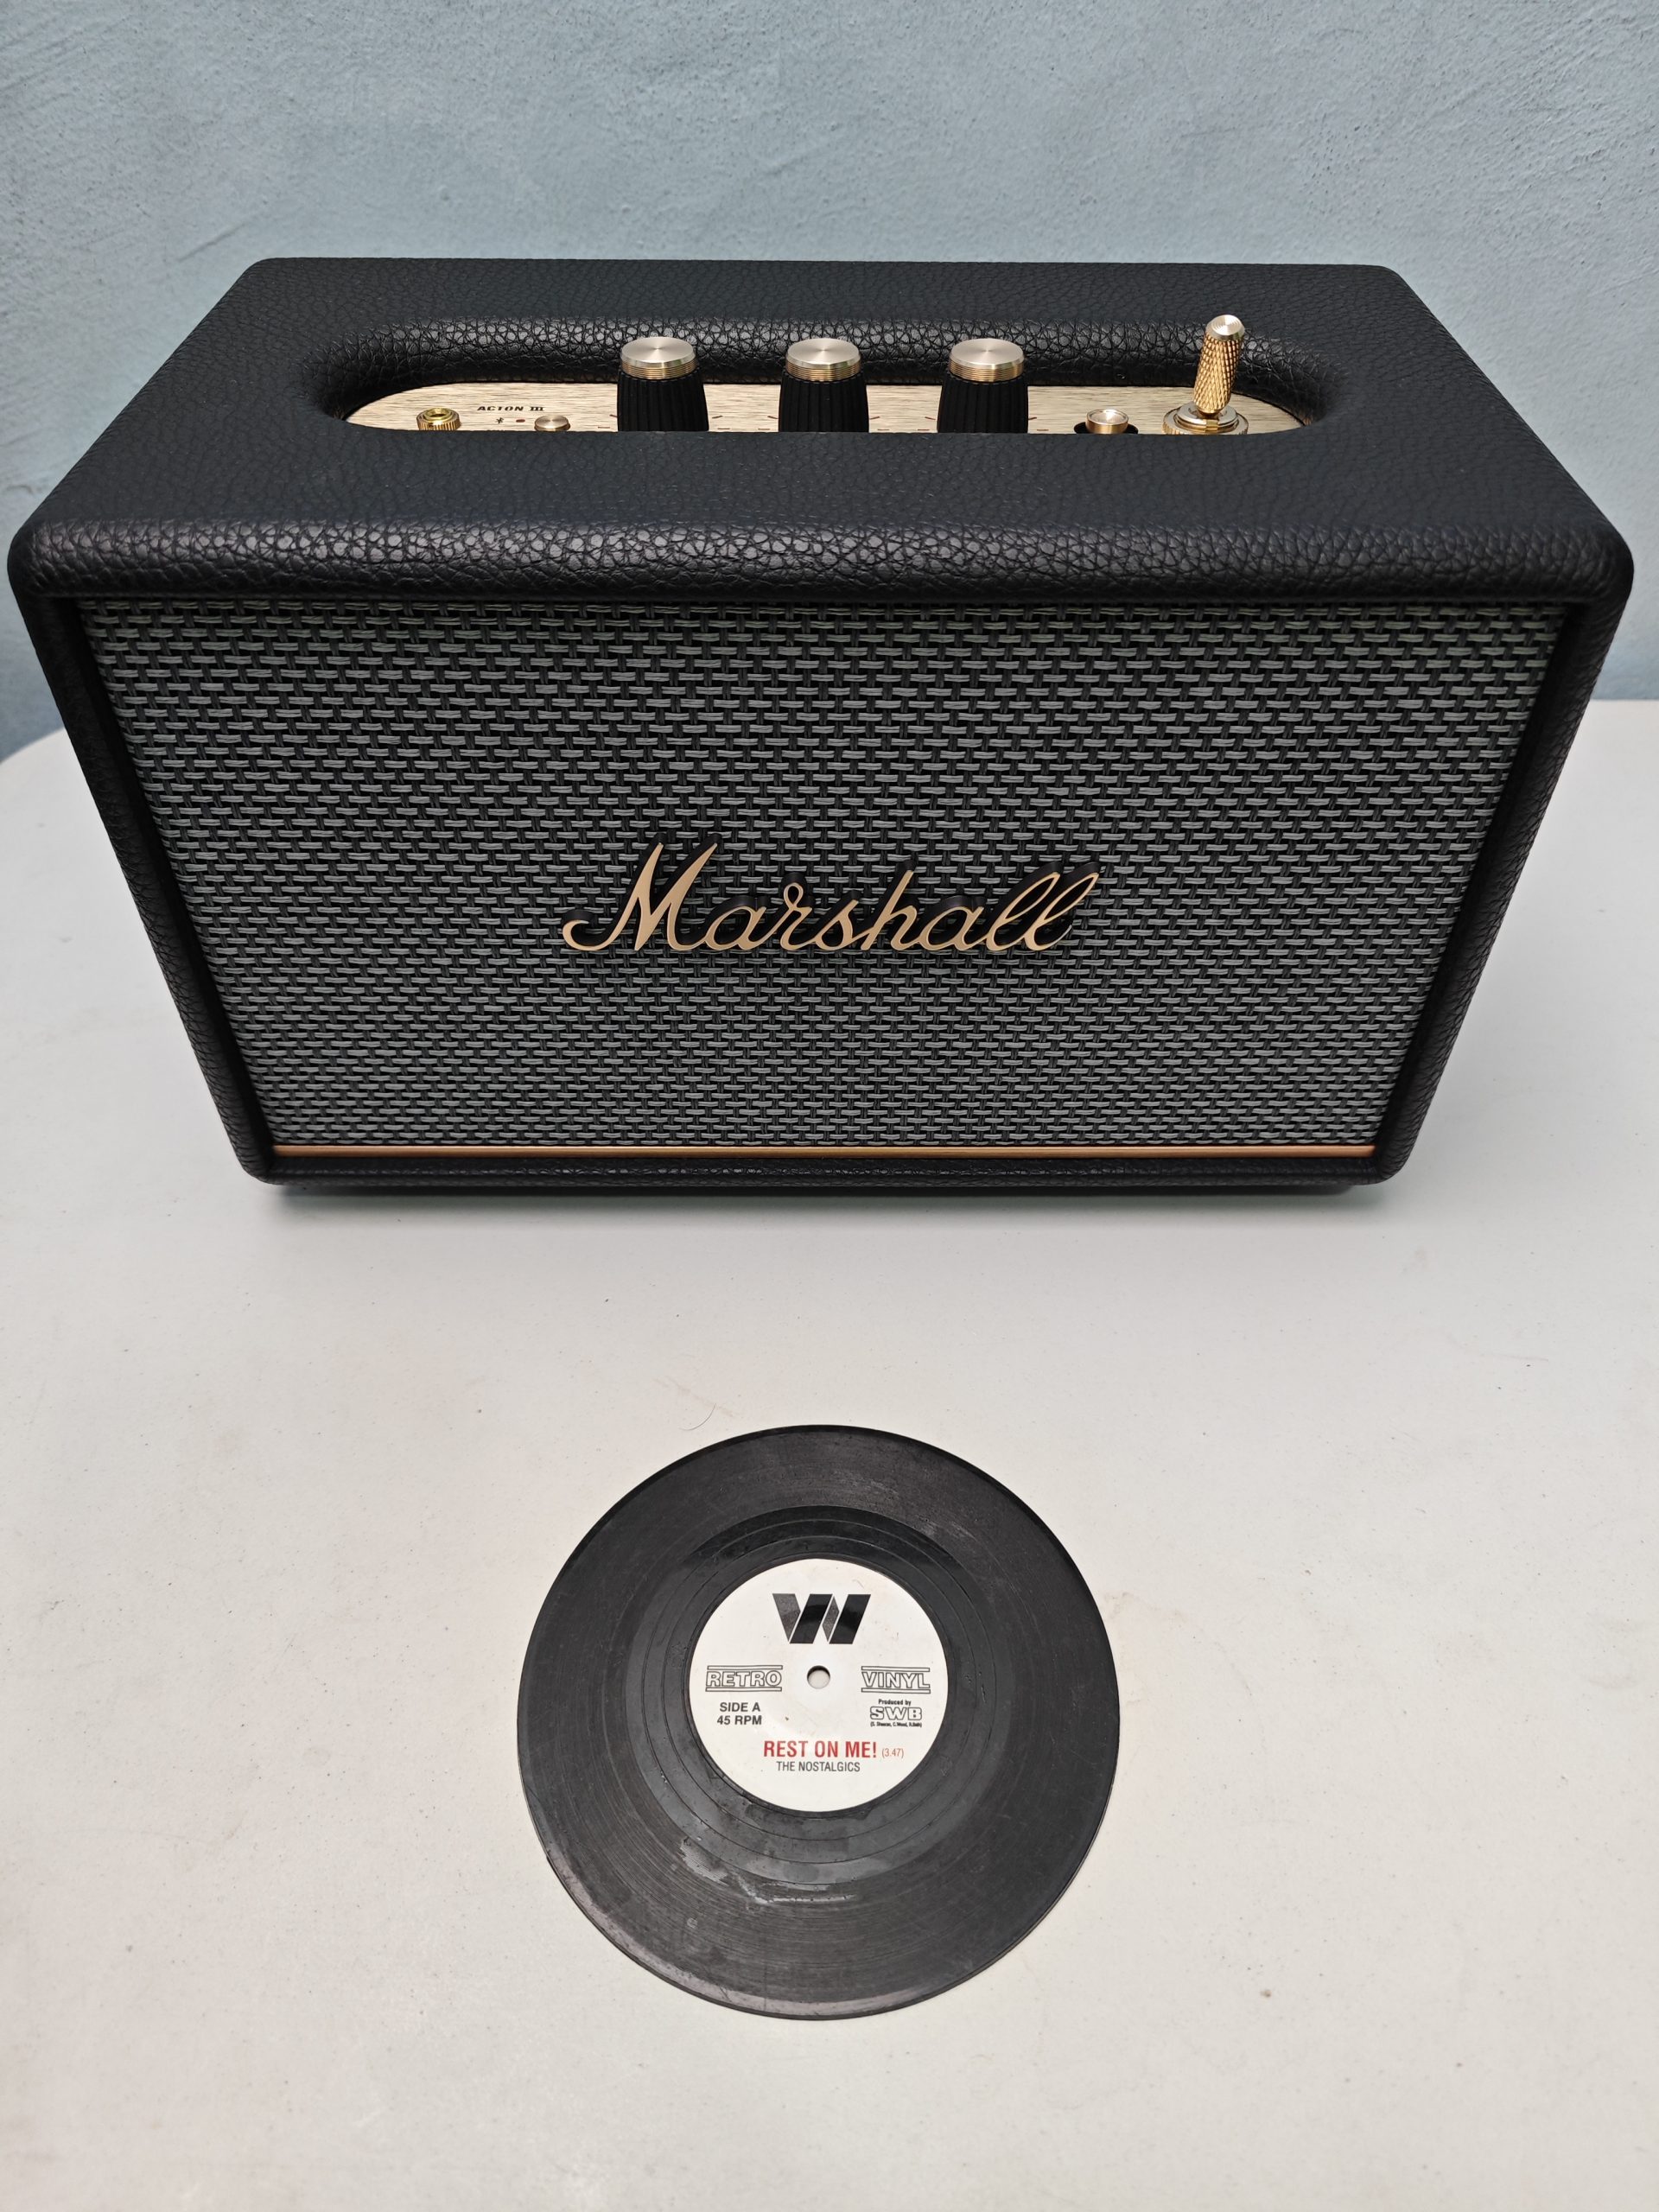 Marshall Woburn III Review: A Powerful Bluetooth Speaker That Takes Home  Listening to New Highs